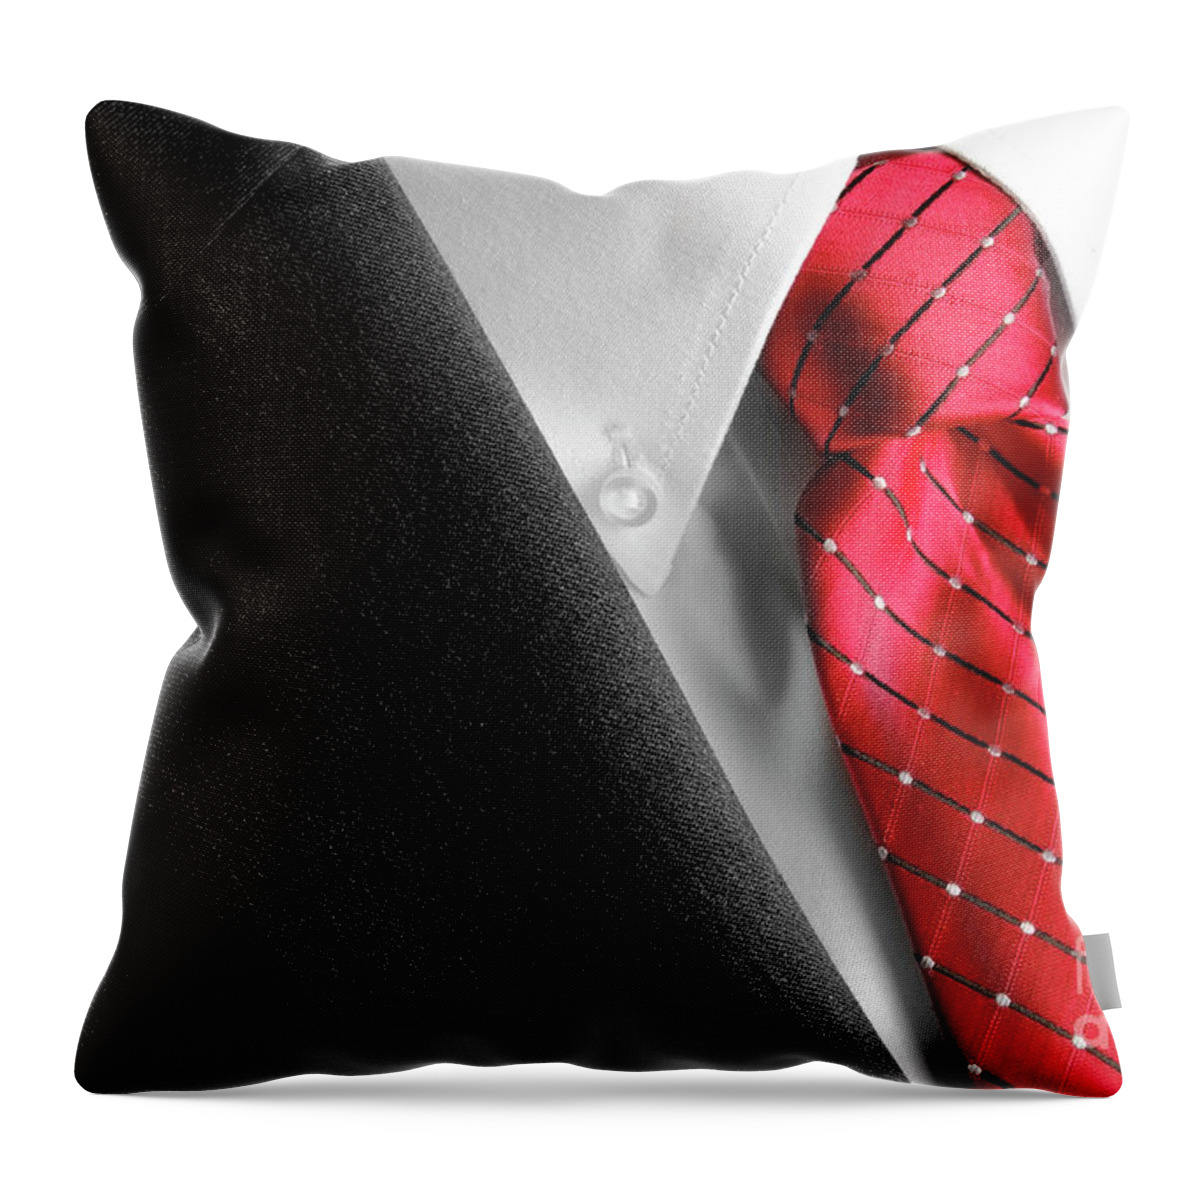 Apparel Throw Pillow featuring the photograph Business Suit White Shirt Red Tie Formal Wear Fashion by Lane Erickson